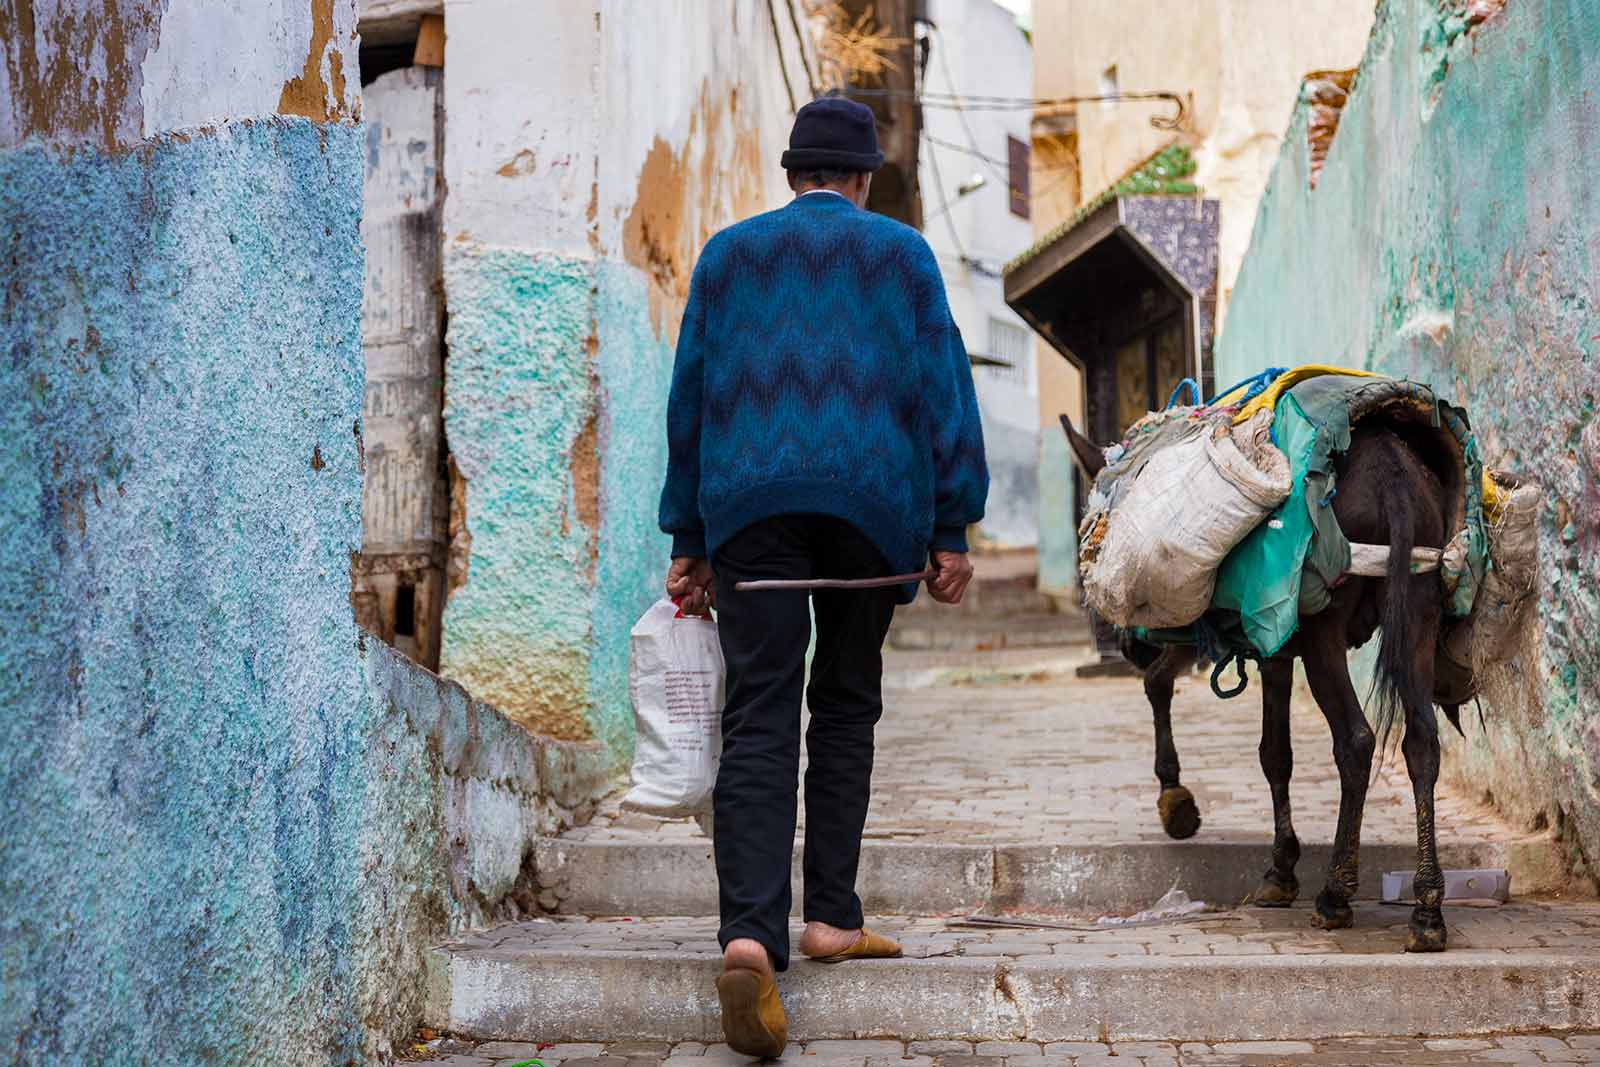 Donkeys can be seen everywhere in Moulay Idriss. They're used to transport everything from people, shopping, luggage, beds, fridges, tables due to the hilly nature of the town.